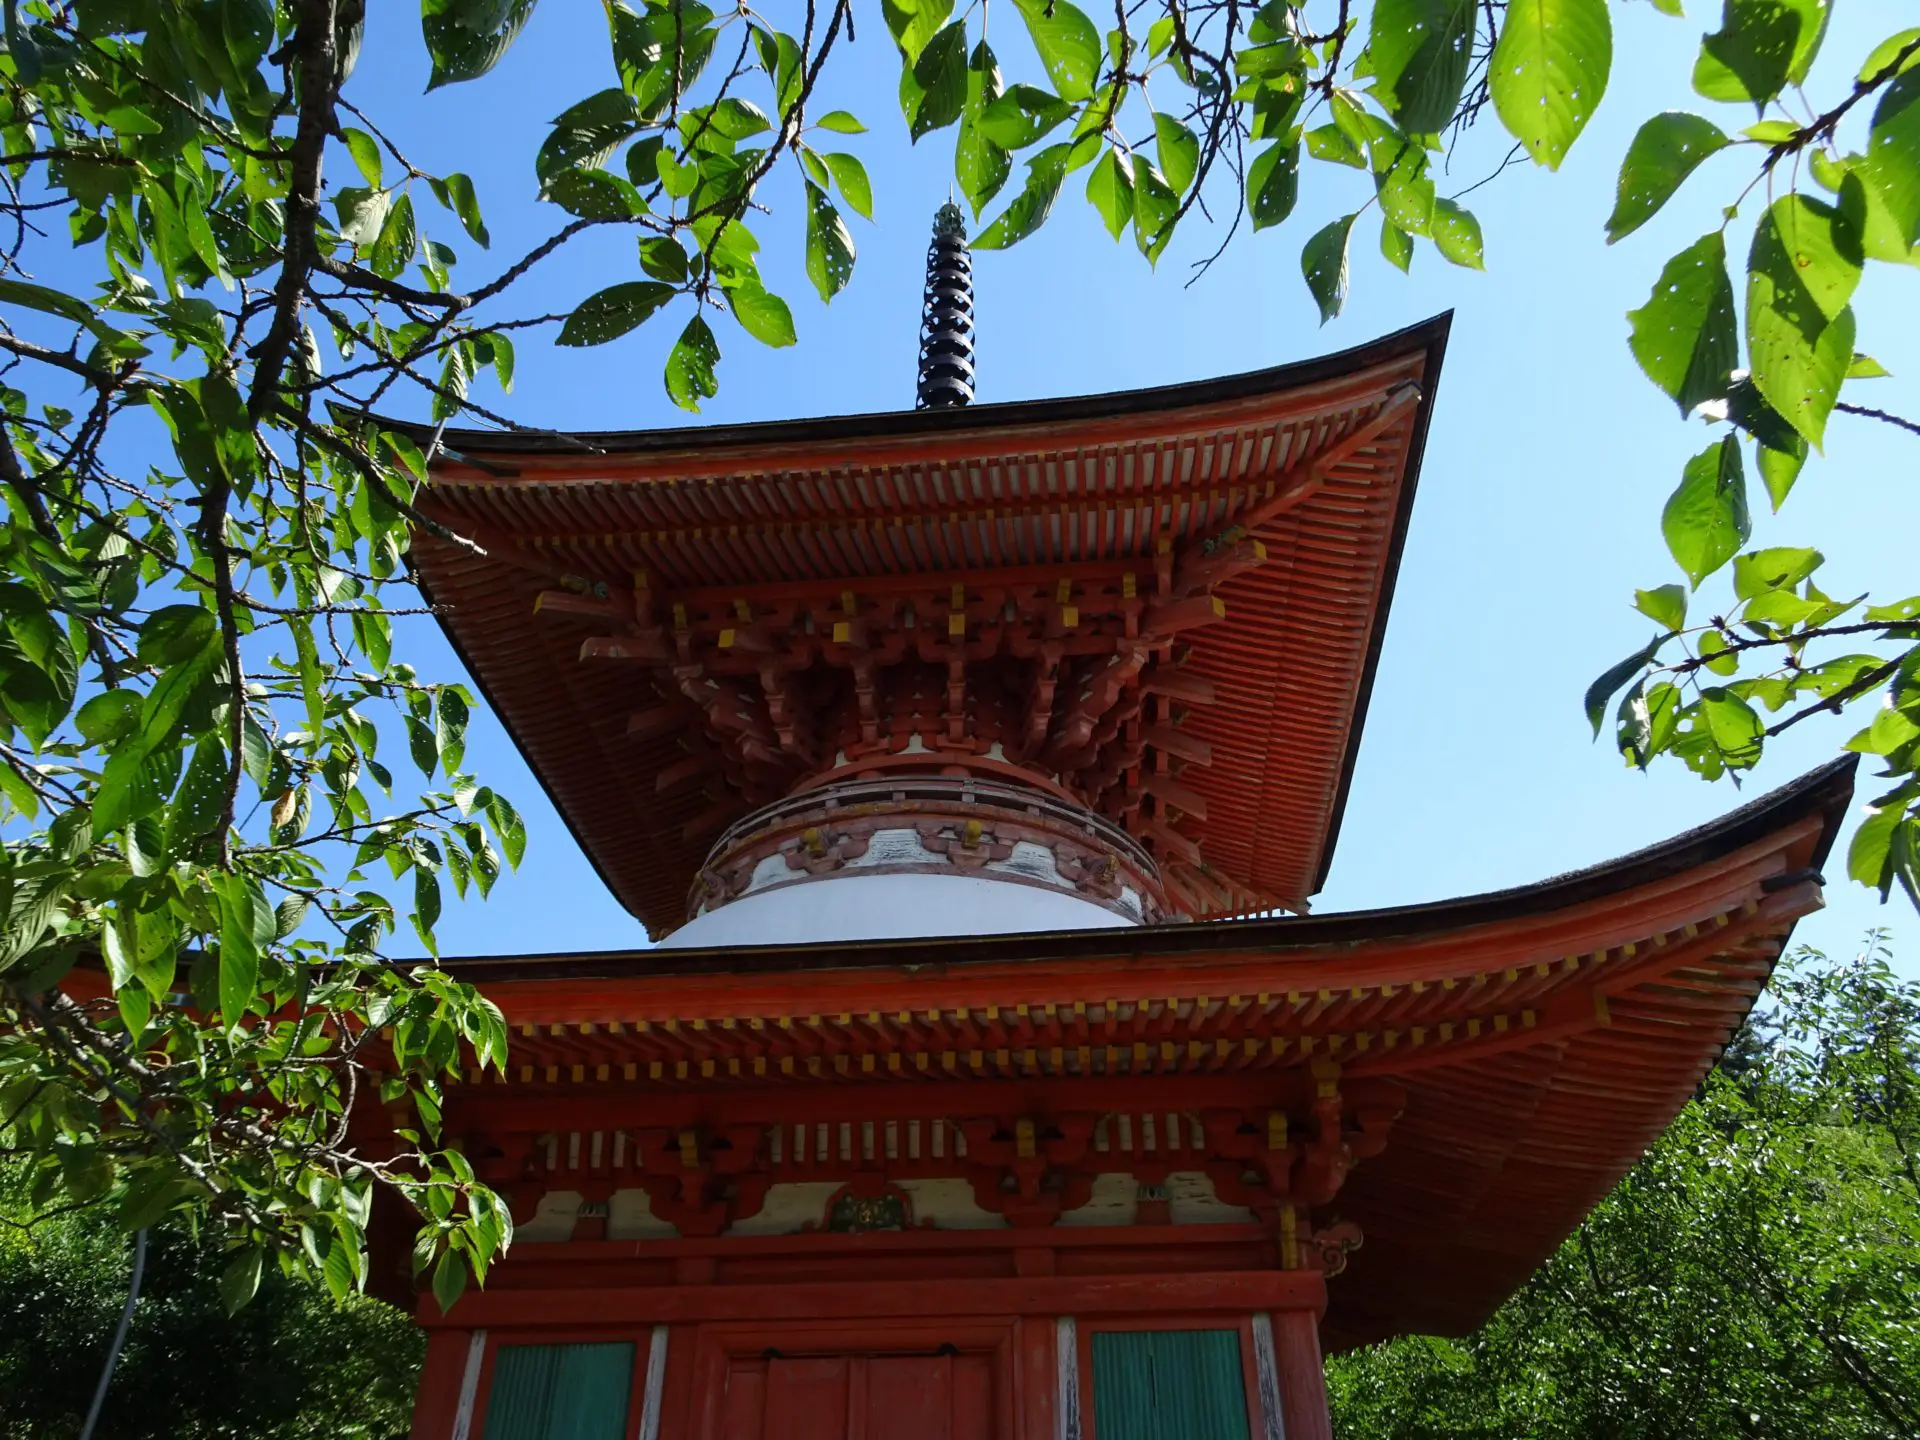 A small red pagoda surrounded by trees